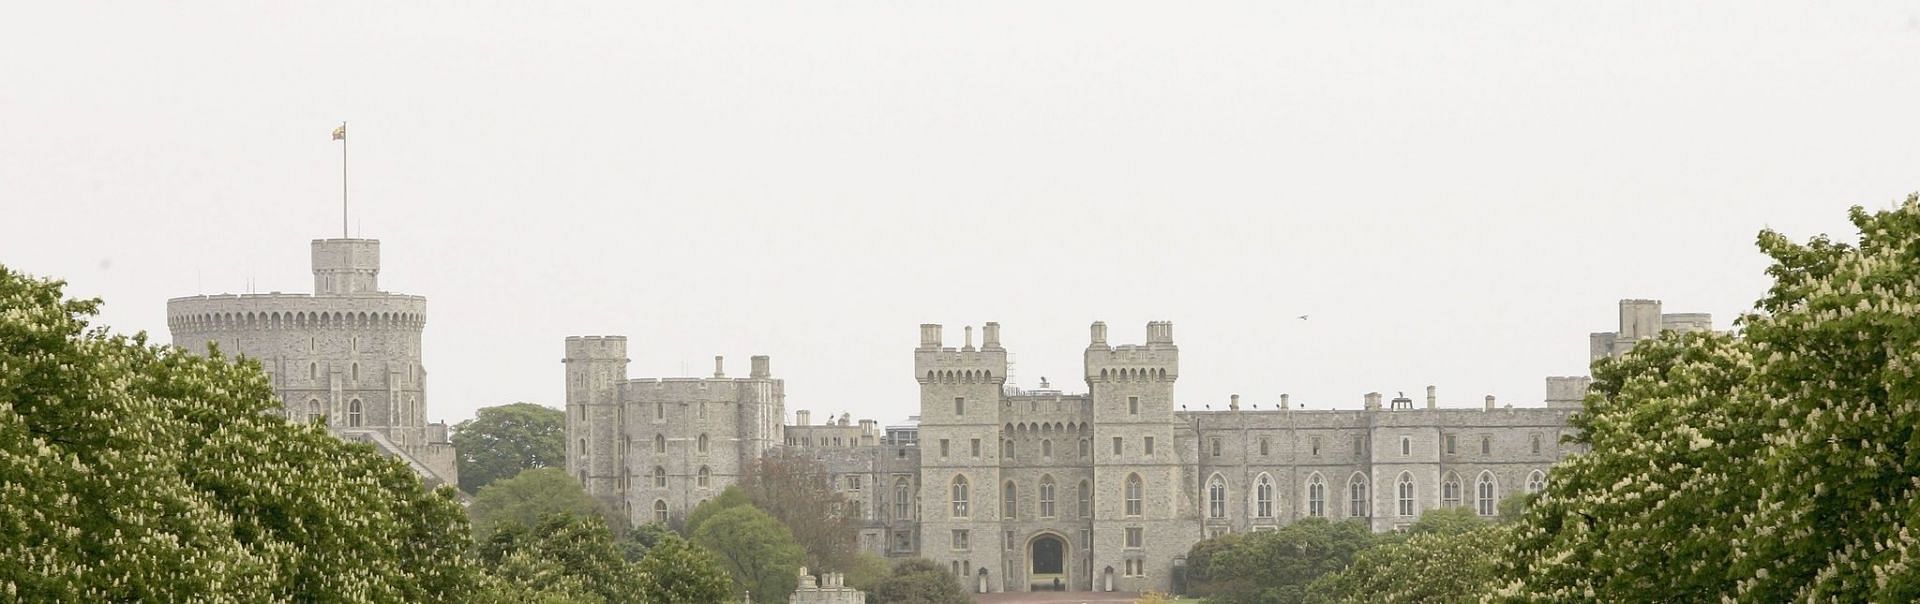 Jaswant Singh Chail was arrested after he allegedly broke into the grounds of Windsor Castle (Image via Tim Graham/Getty Images)